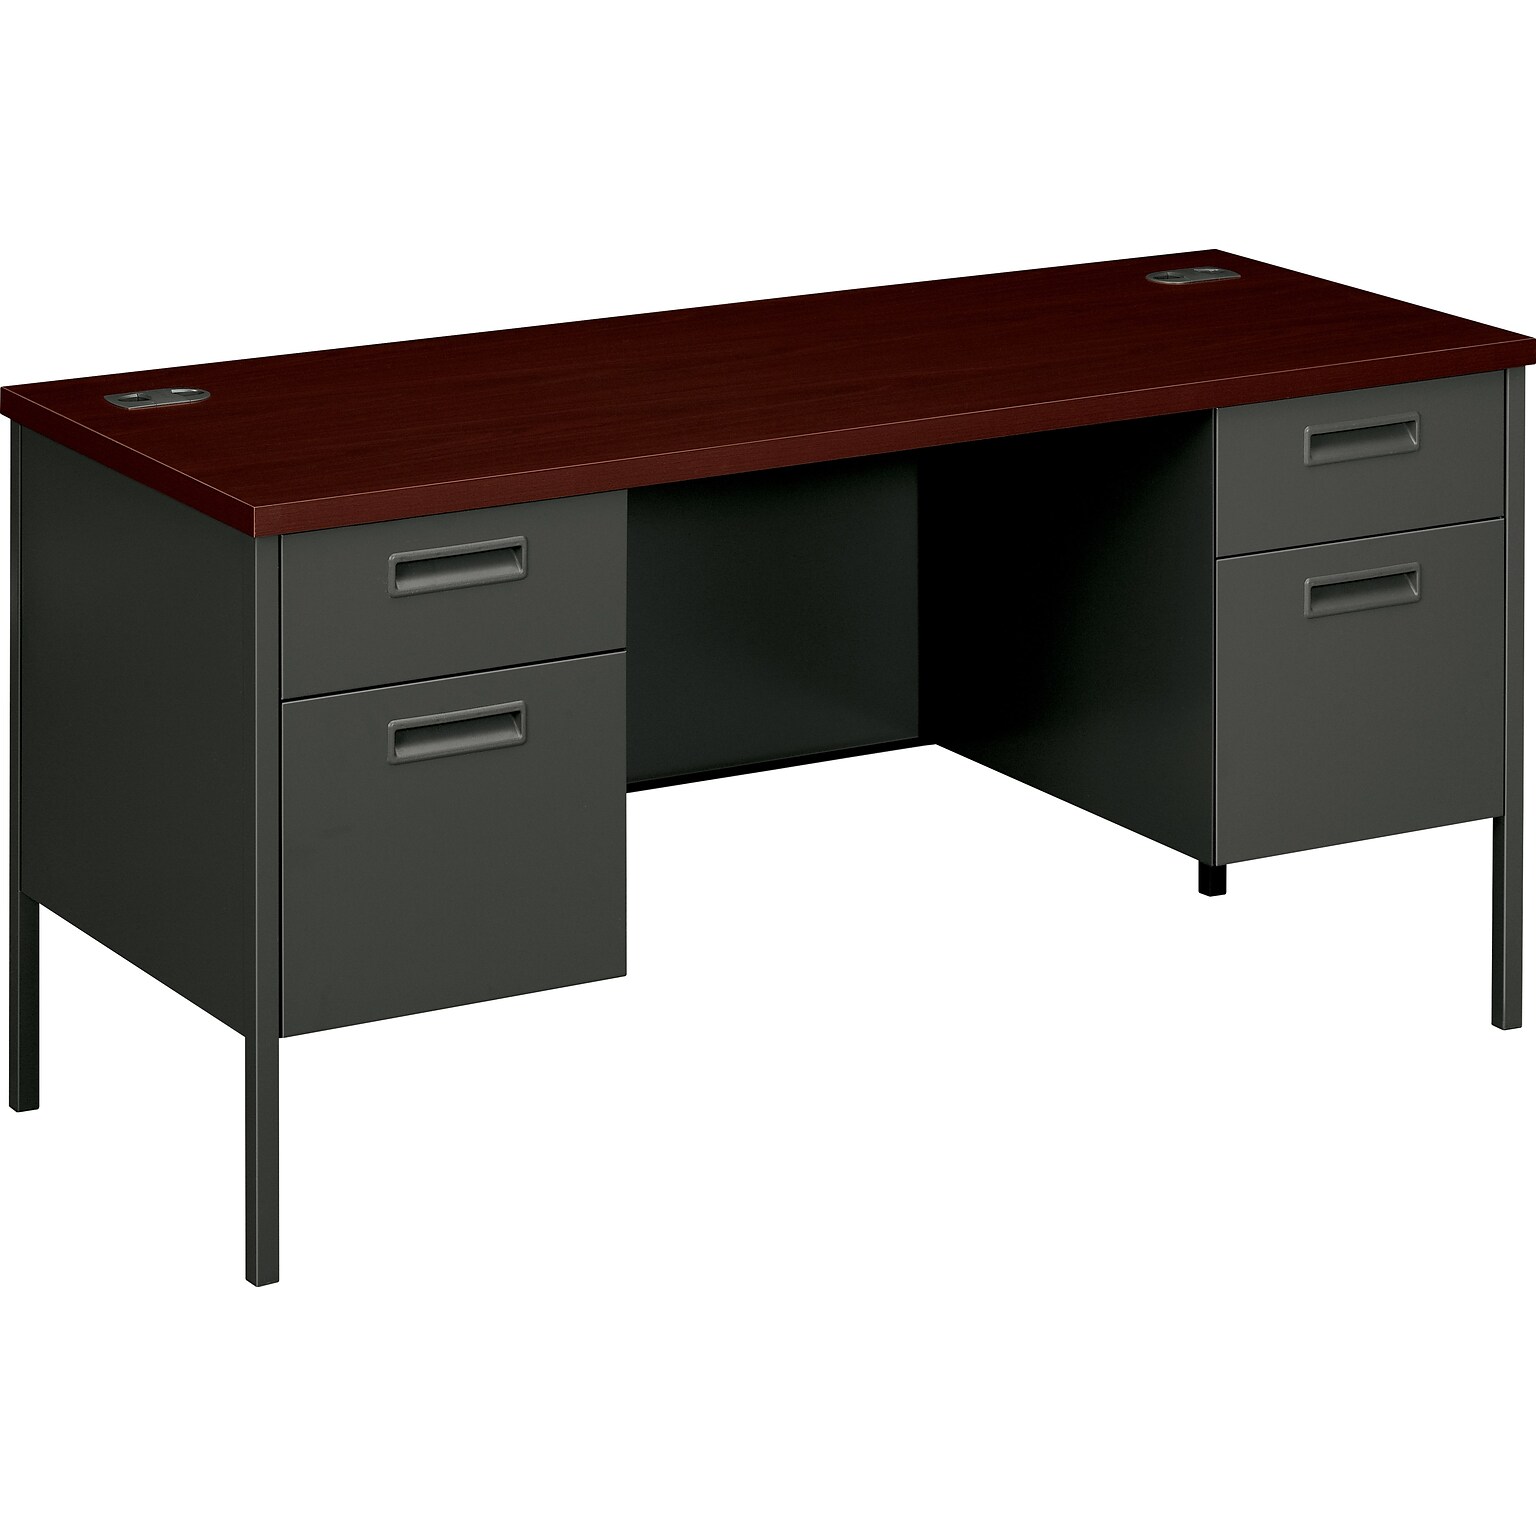 HON® Metro Classic Series Metal Office Suite in Mahogany/Charcoal Finish; Credenza